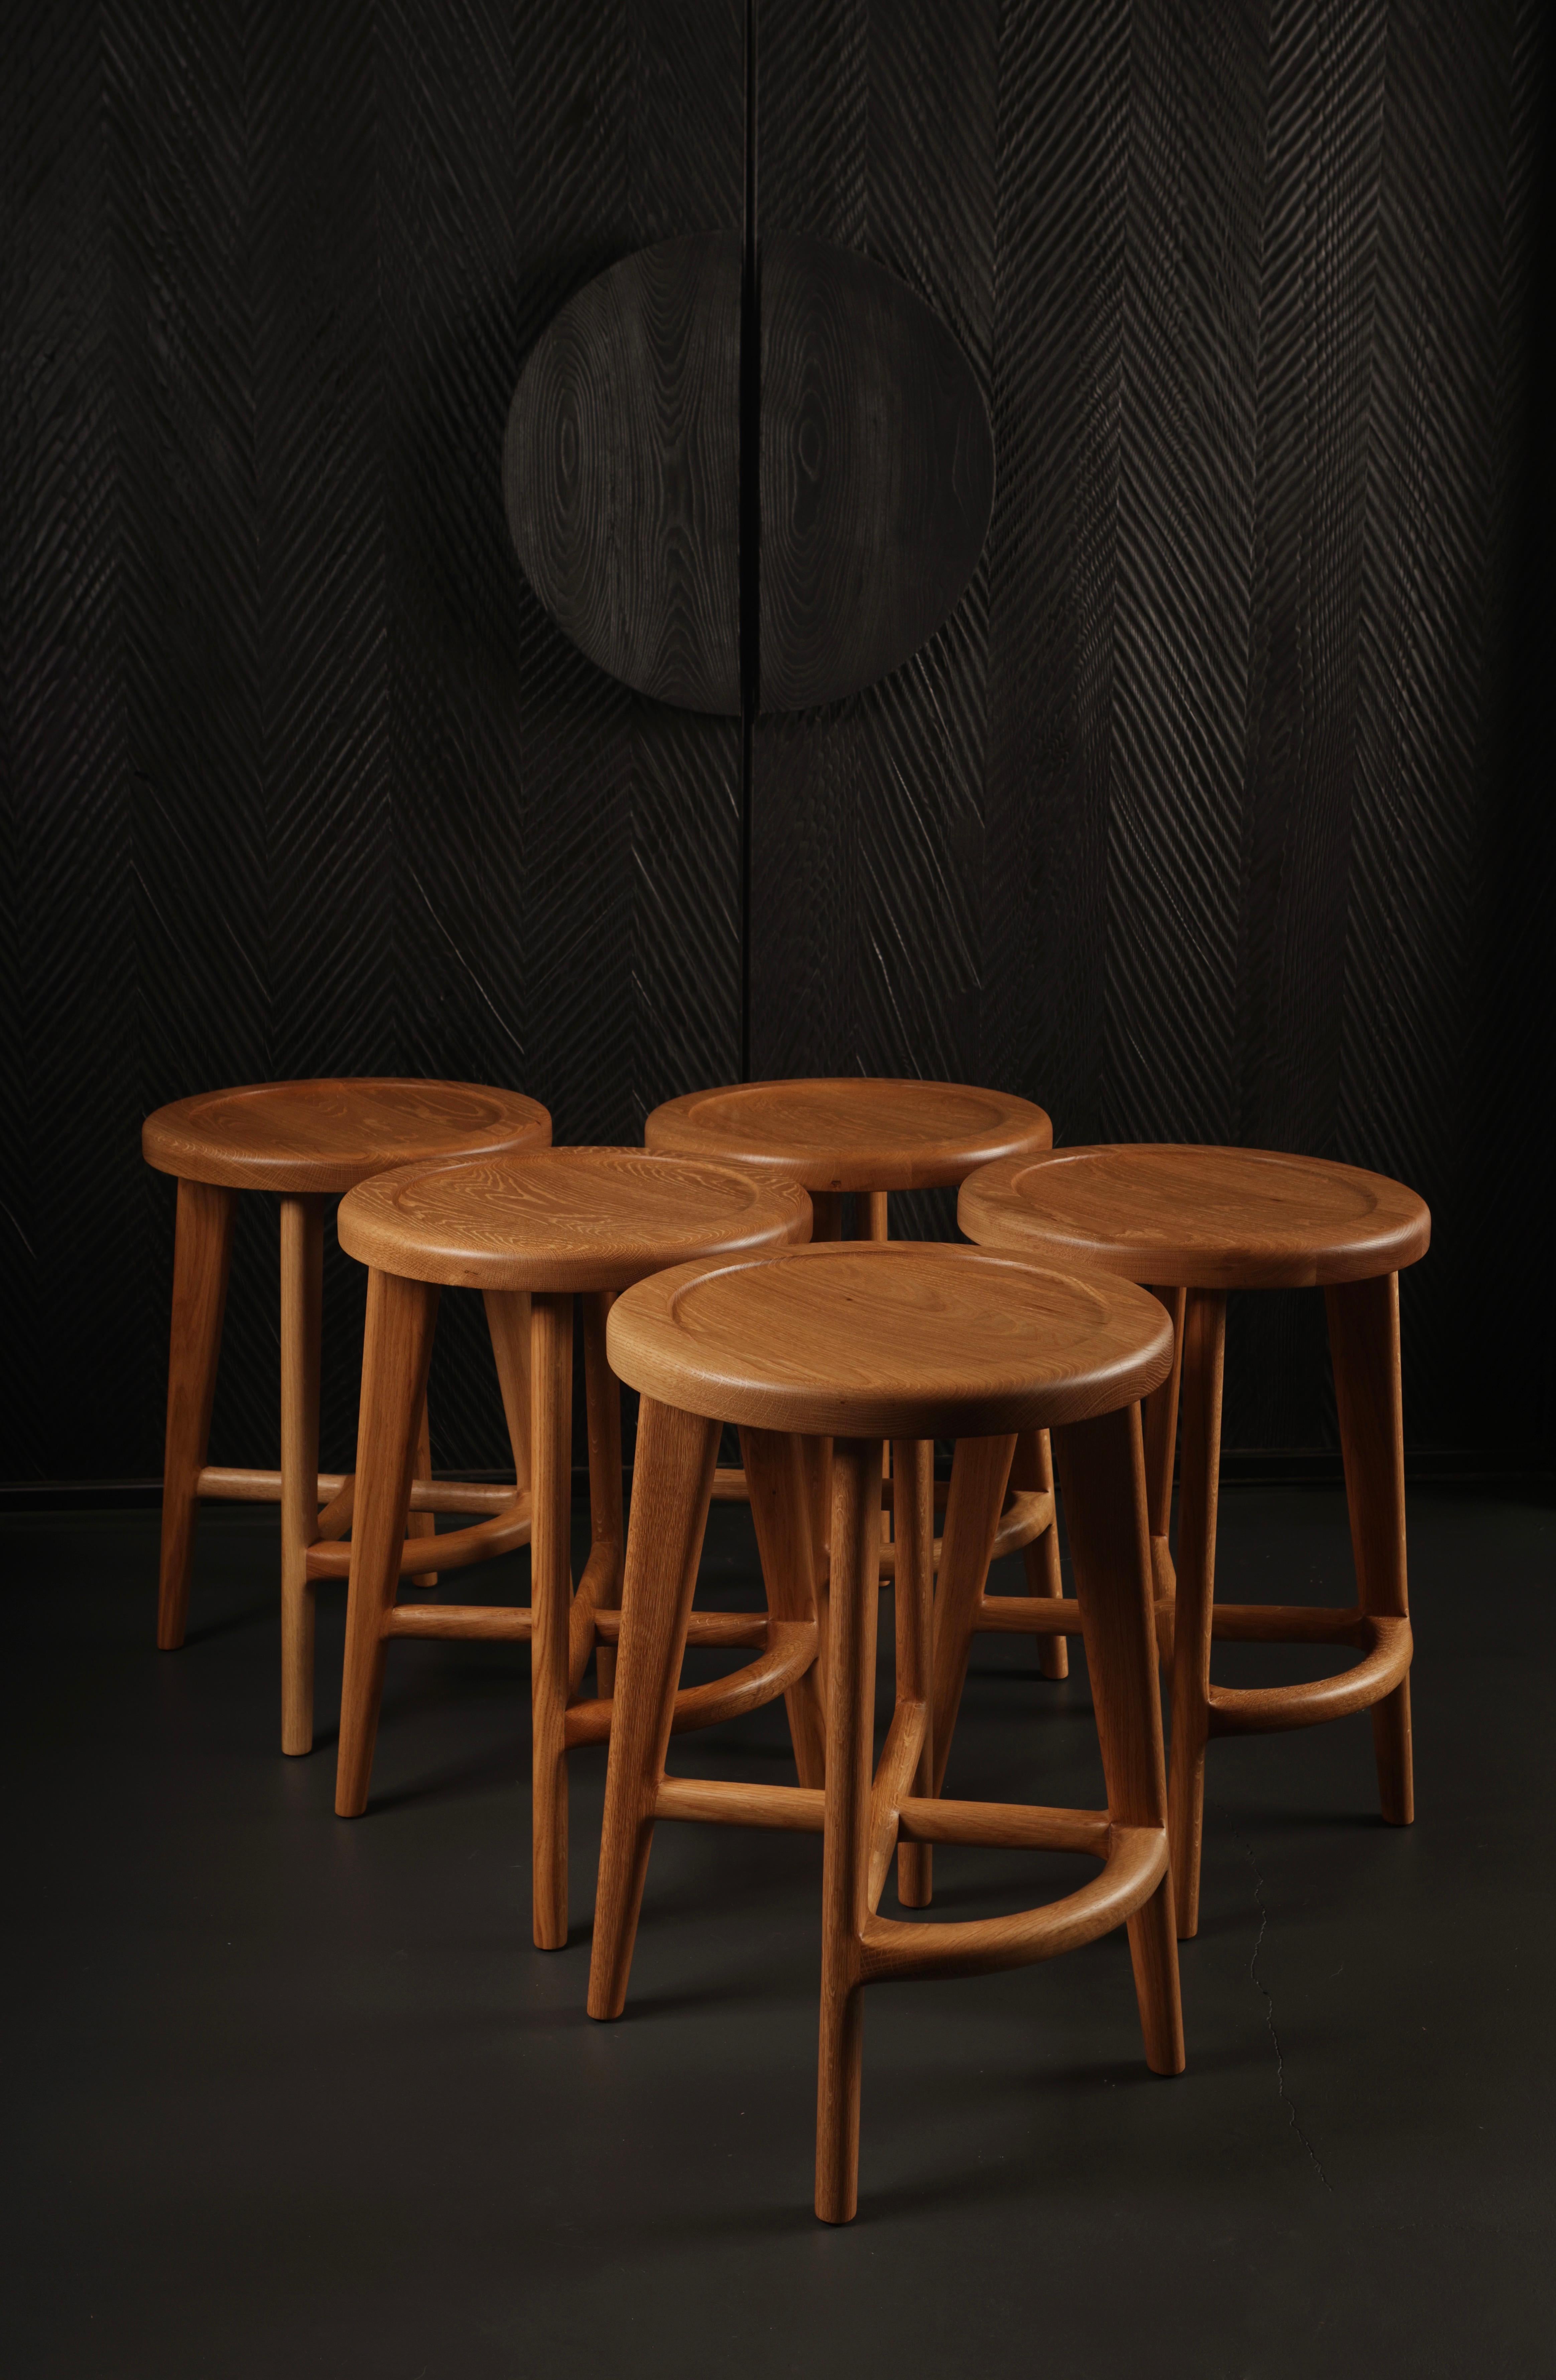 A classic design that will beautifully suit any home interior. Crafted from solid white oak, wood is hand-selected for colour uniformity and quality. Our bar stools feature generously sized seats, sculpted for comfort. The seamlessly integrated